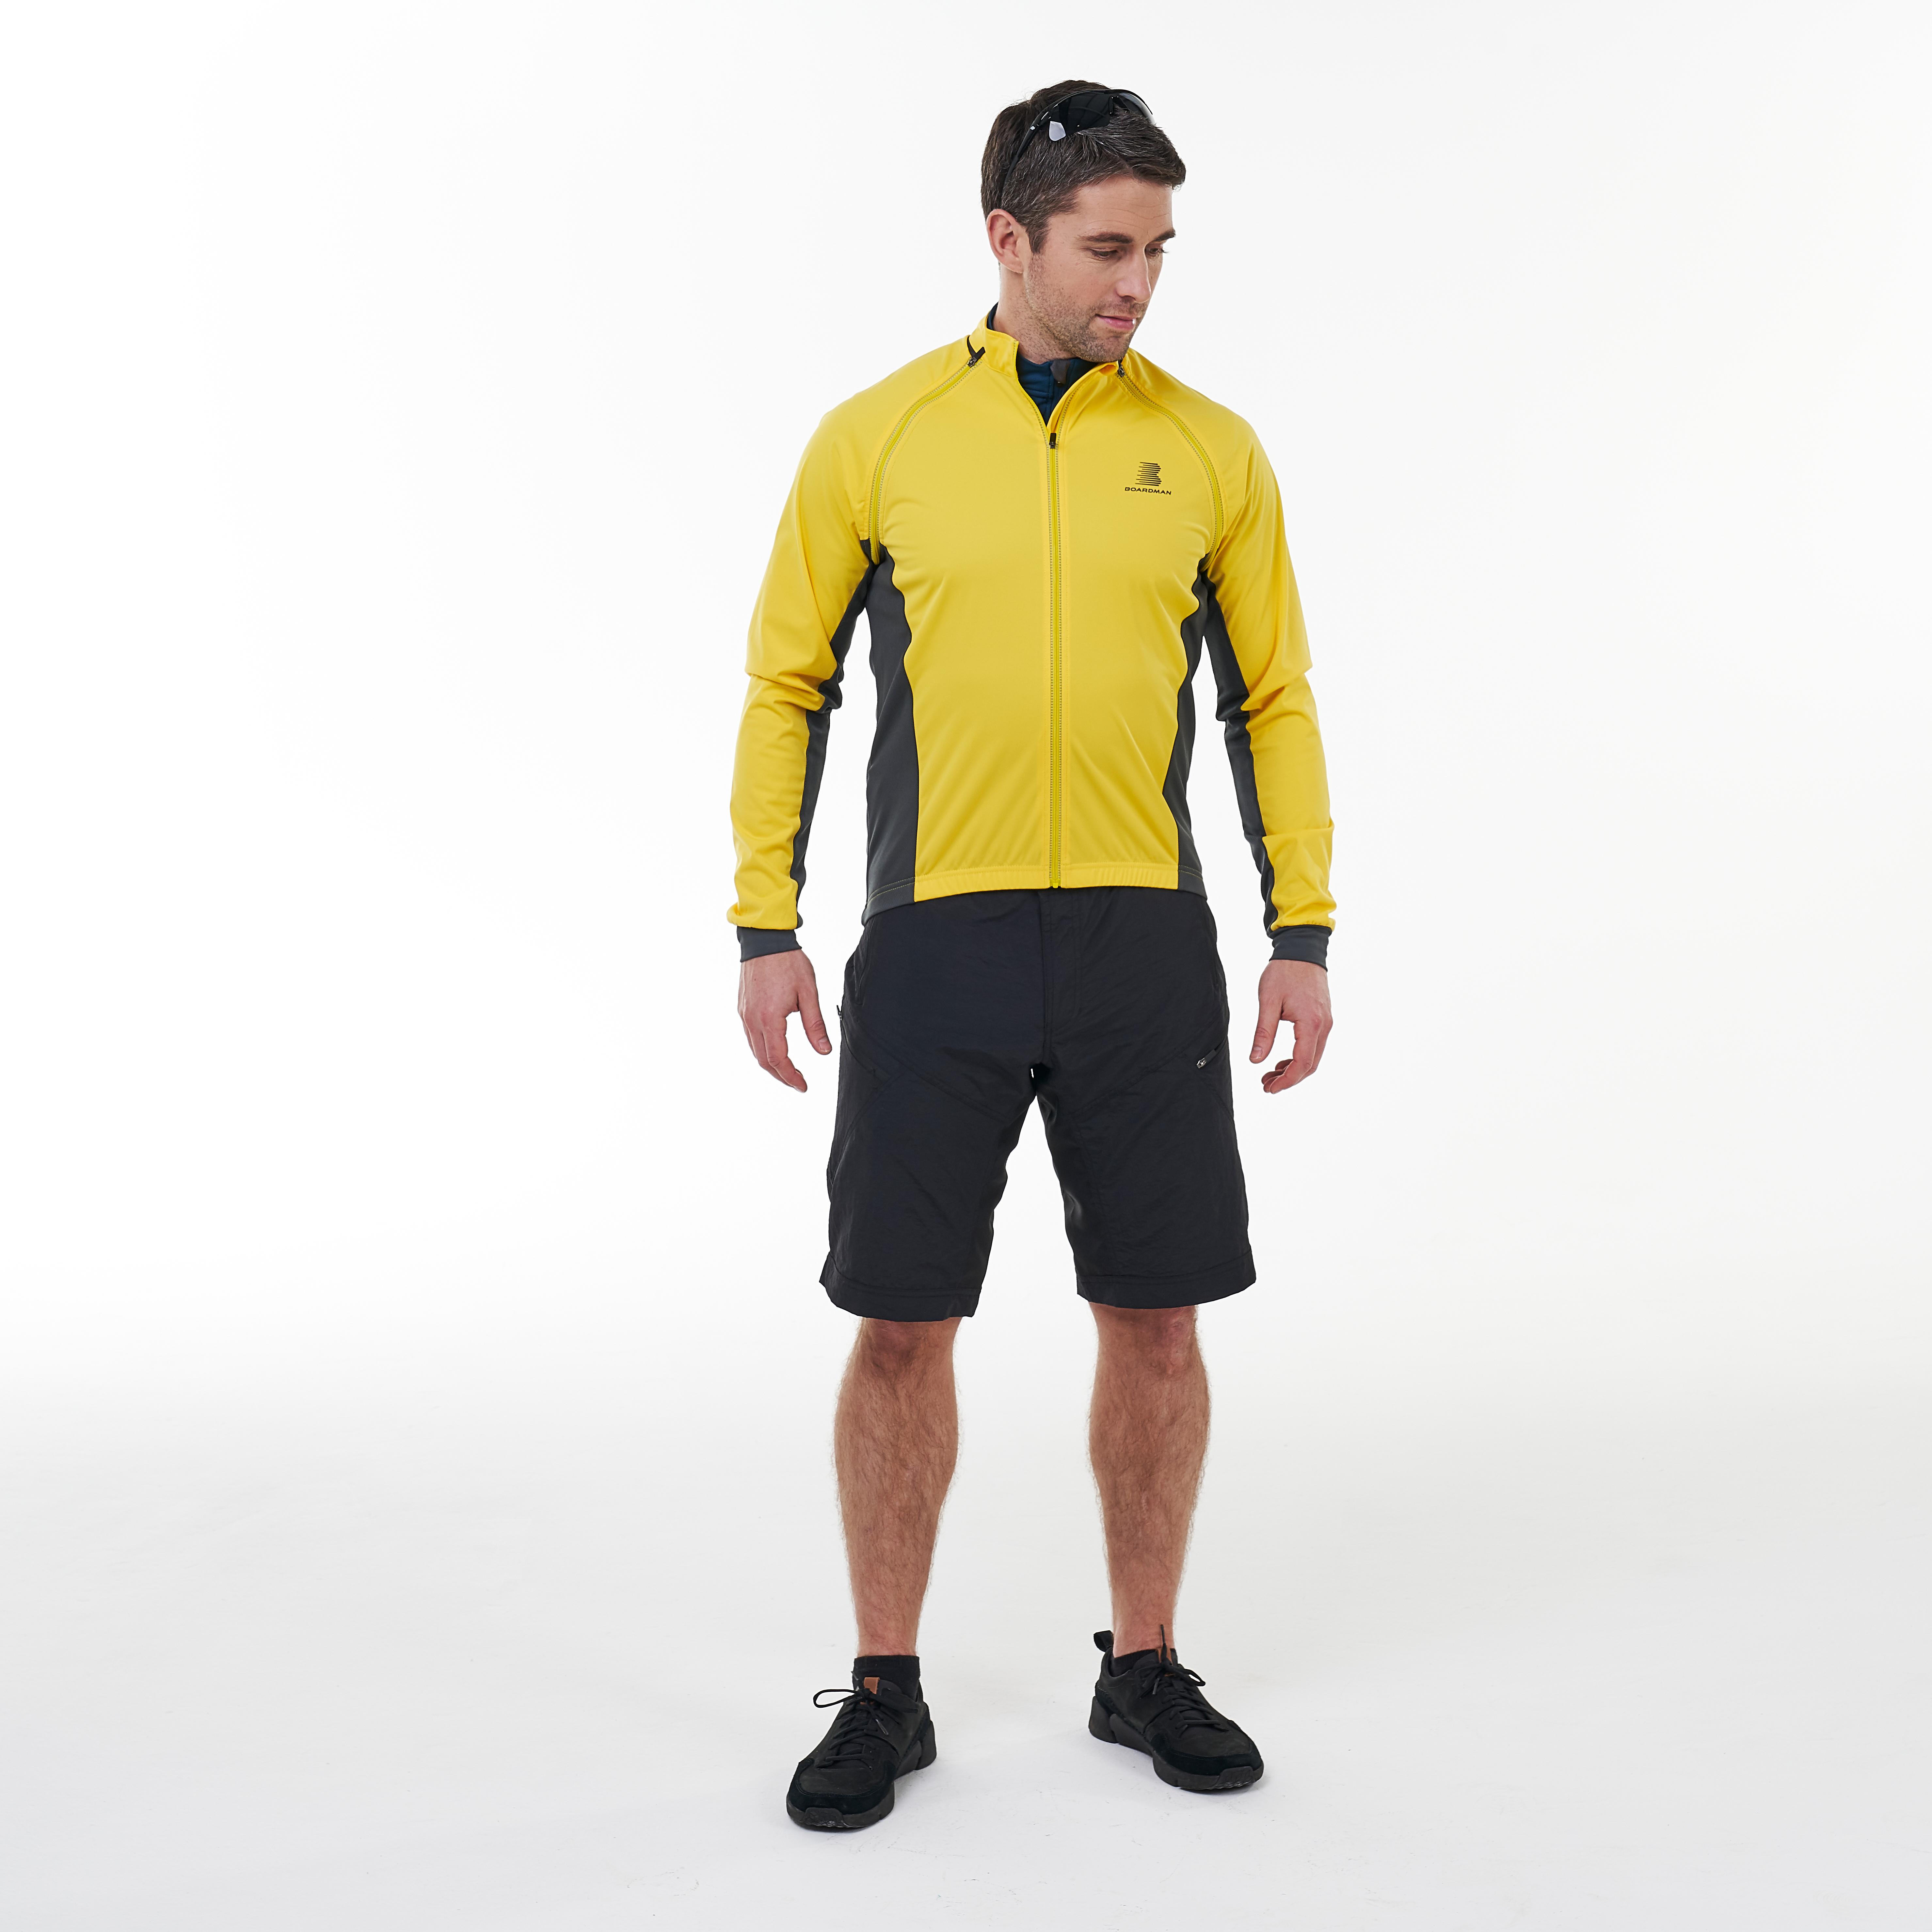 boardman mens removable sleeve cycling jacket